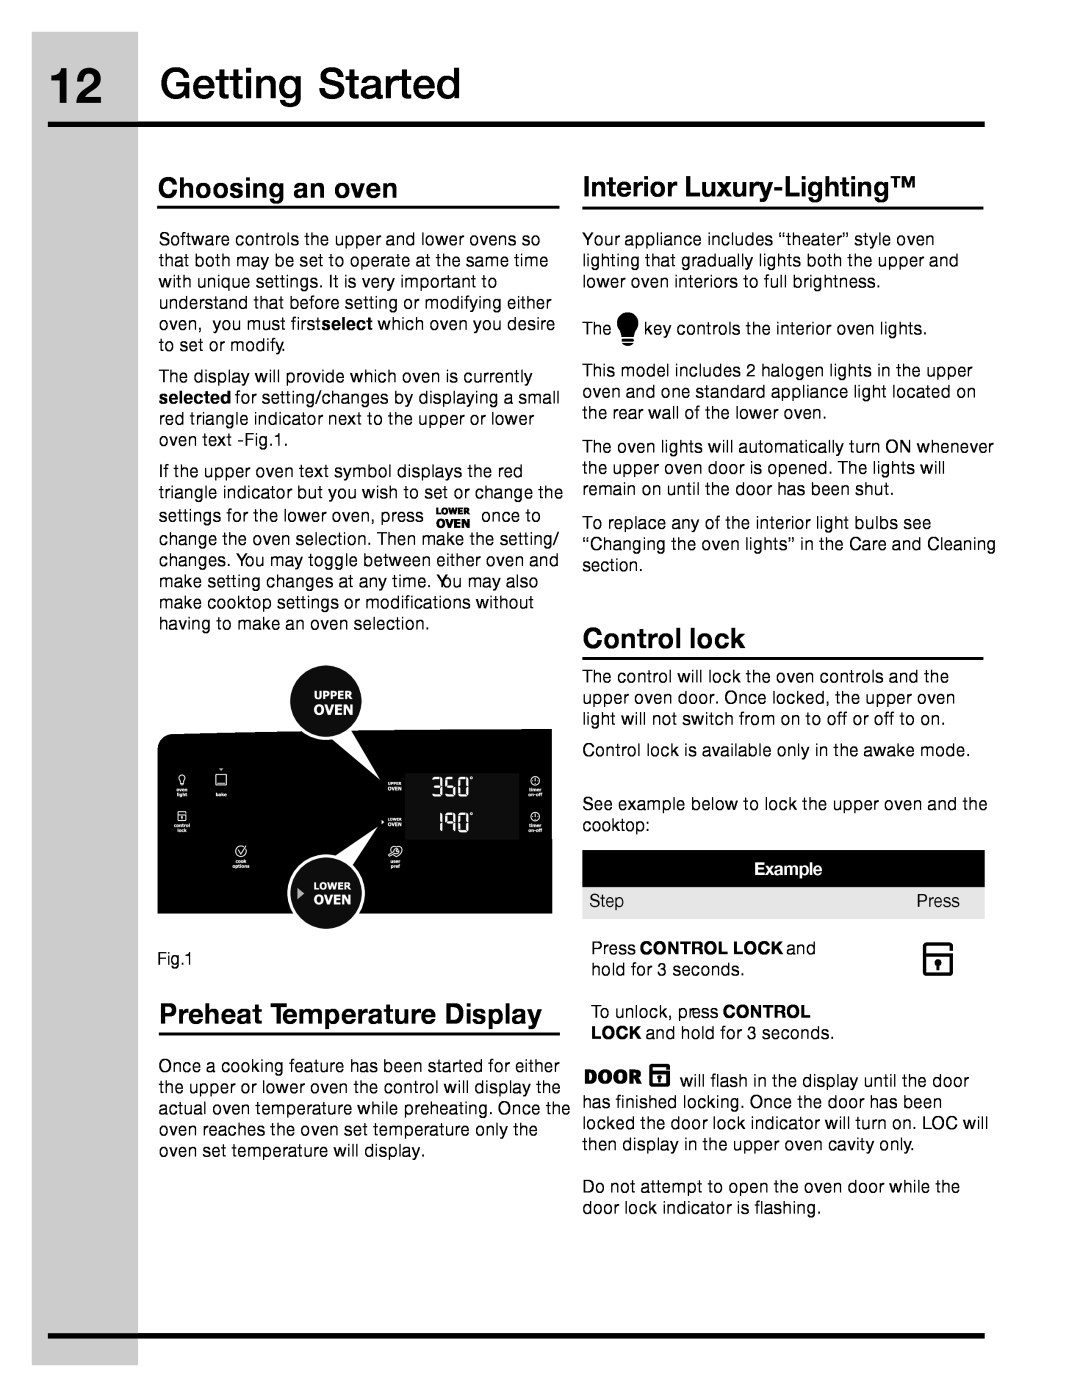 Electrolux 316471113 Getting Started, Choosing an oven, Interior Luxury-Lighting, Control lock, Press CONTROL LOCK and 